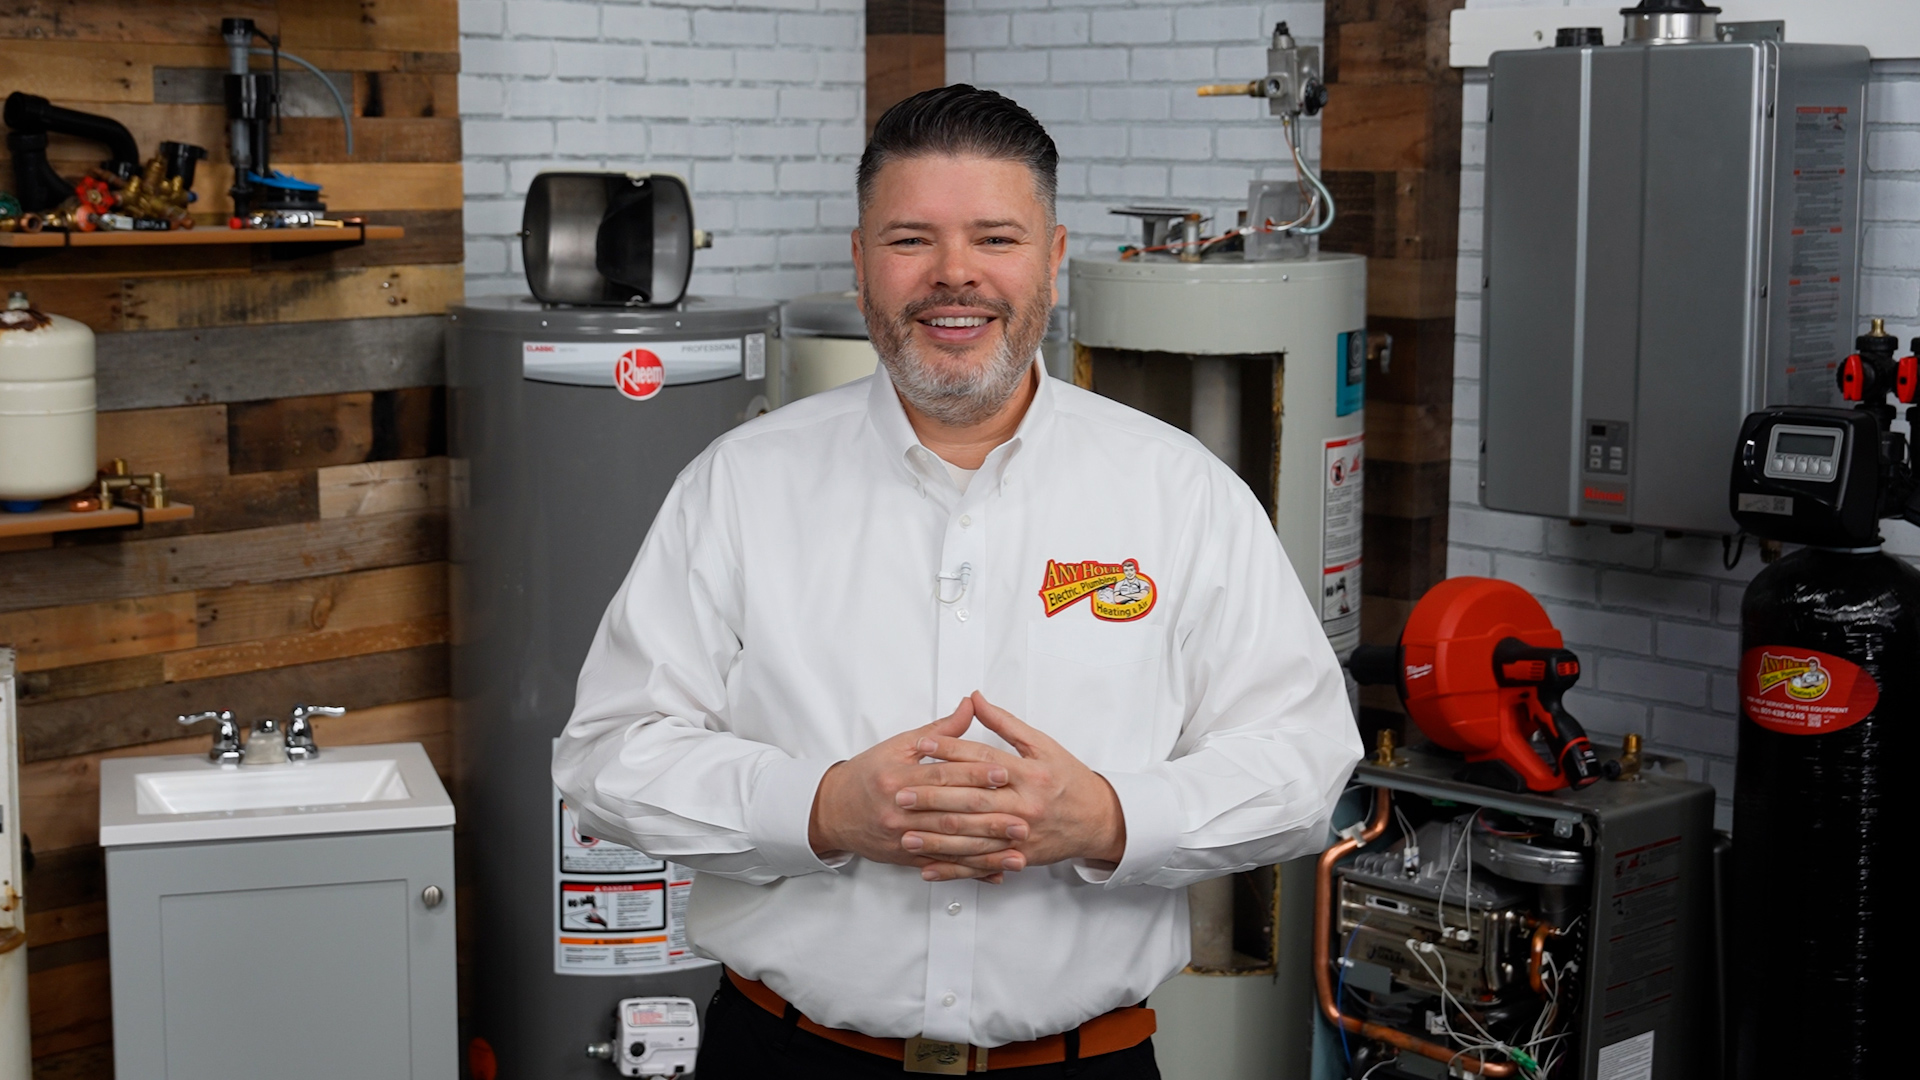 Get A Free Furnace With Any Hour Services